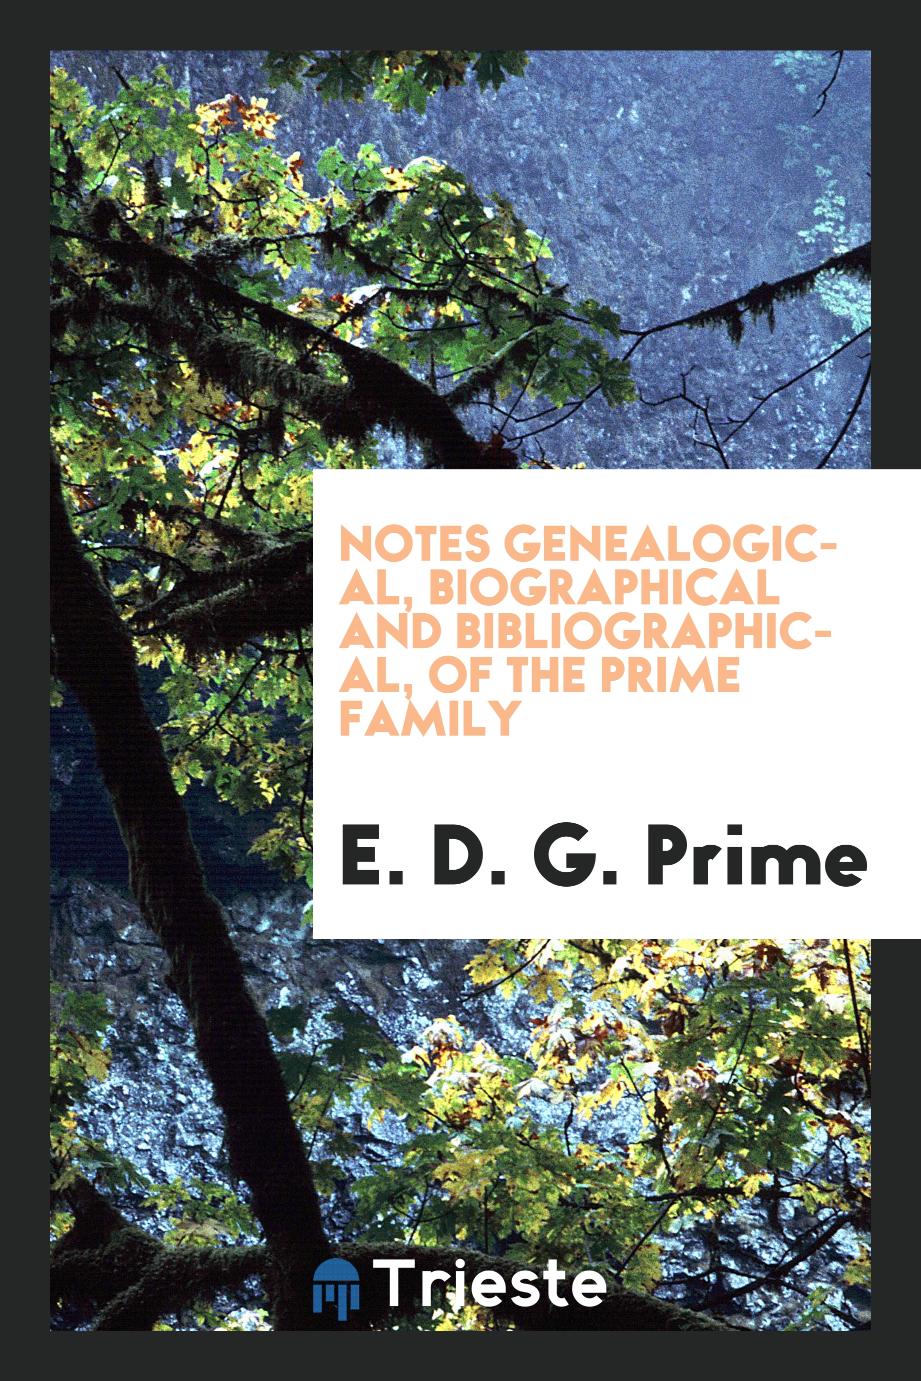 Notes genealogical, biographical and bibliographical, of the Prime family